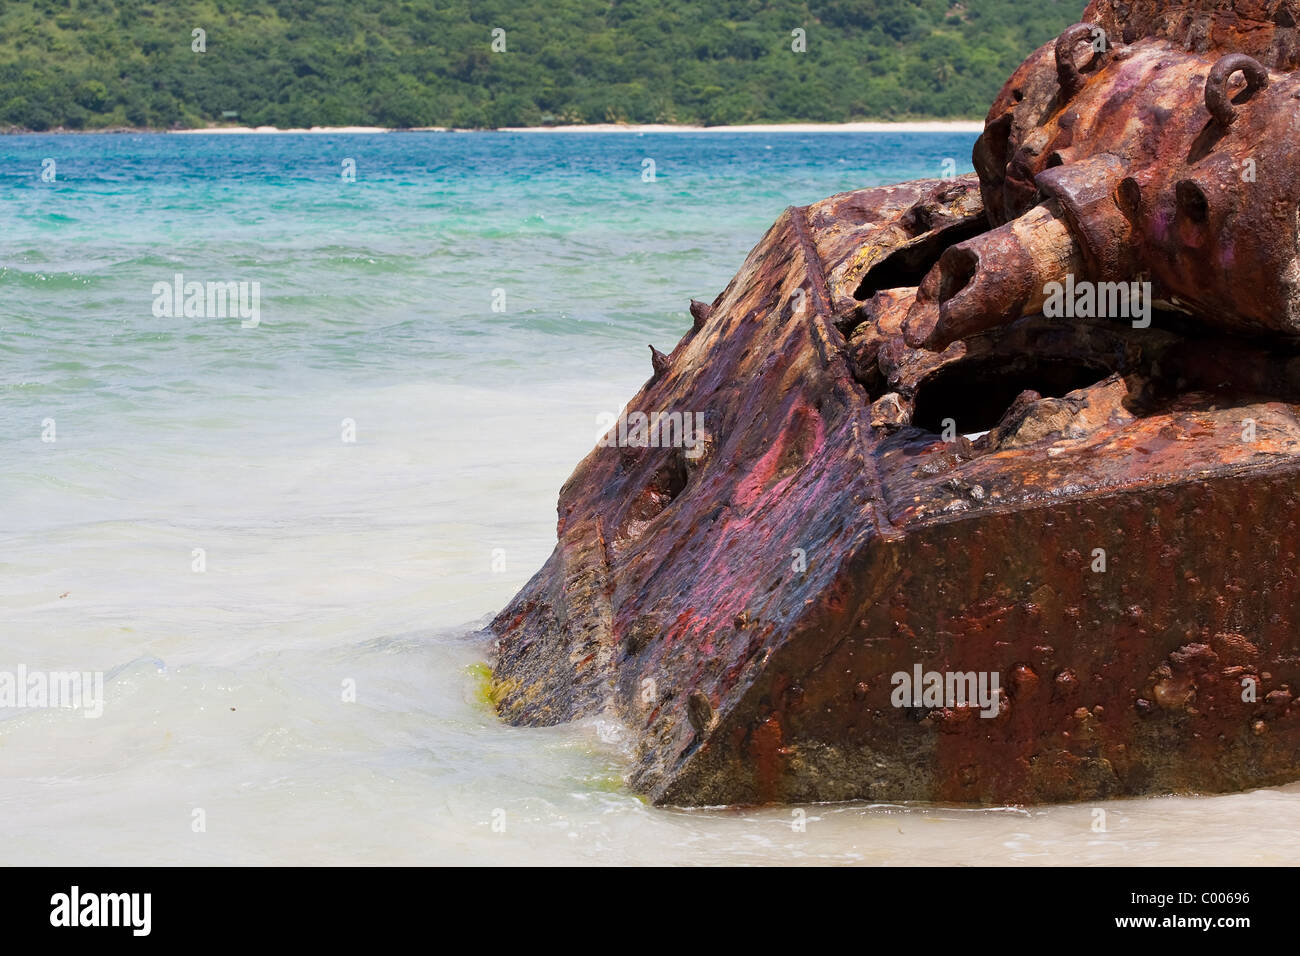 Close up of the old rusted and deserted US Army tank of Flamenco beach on the Puerto Rican island of Culebra. Stock Photo